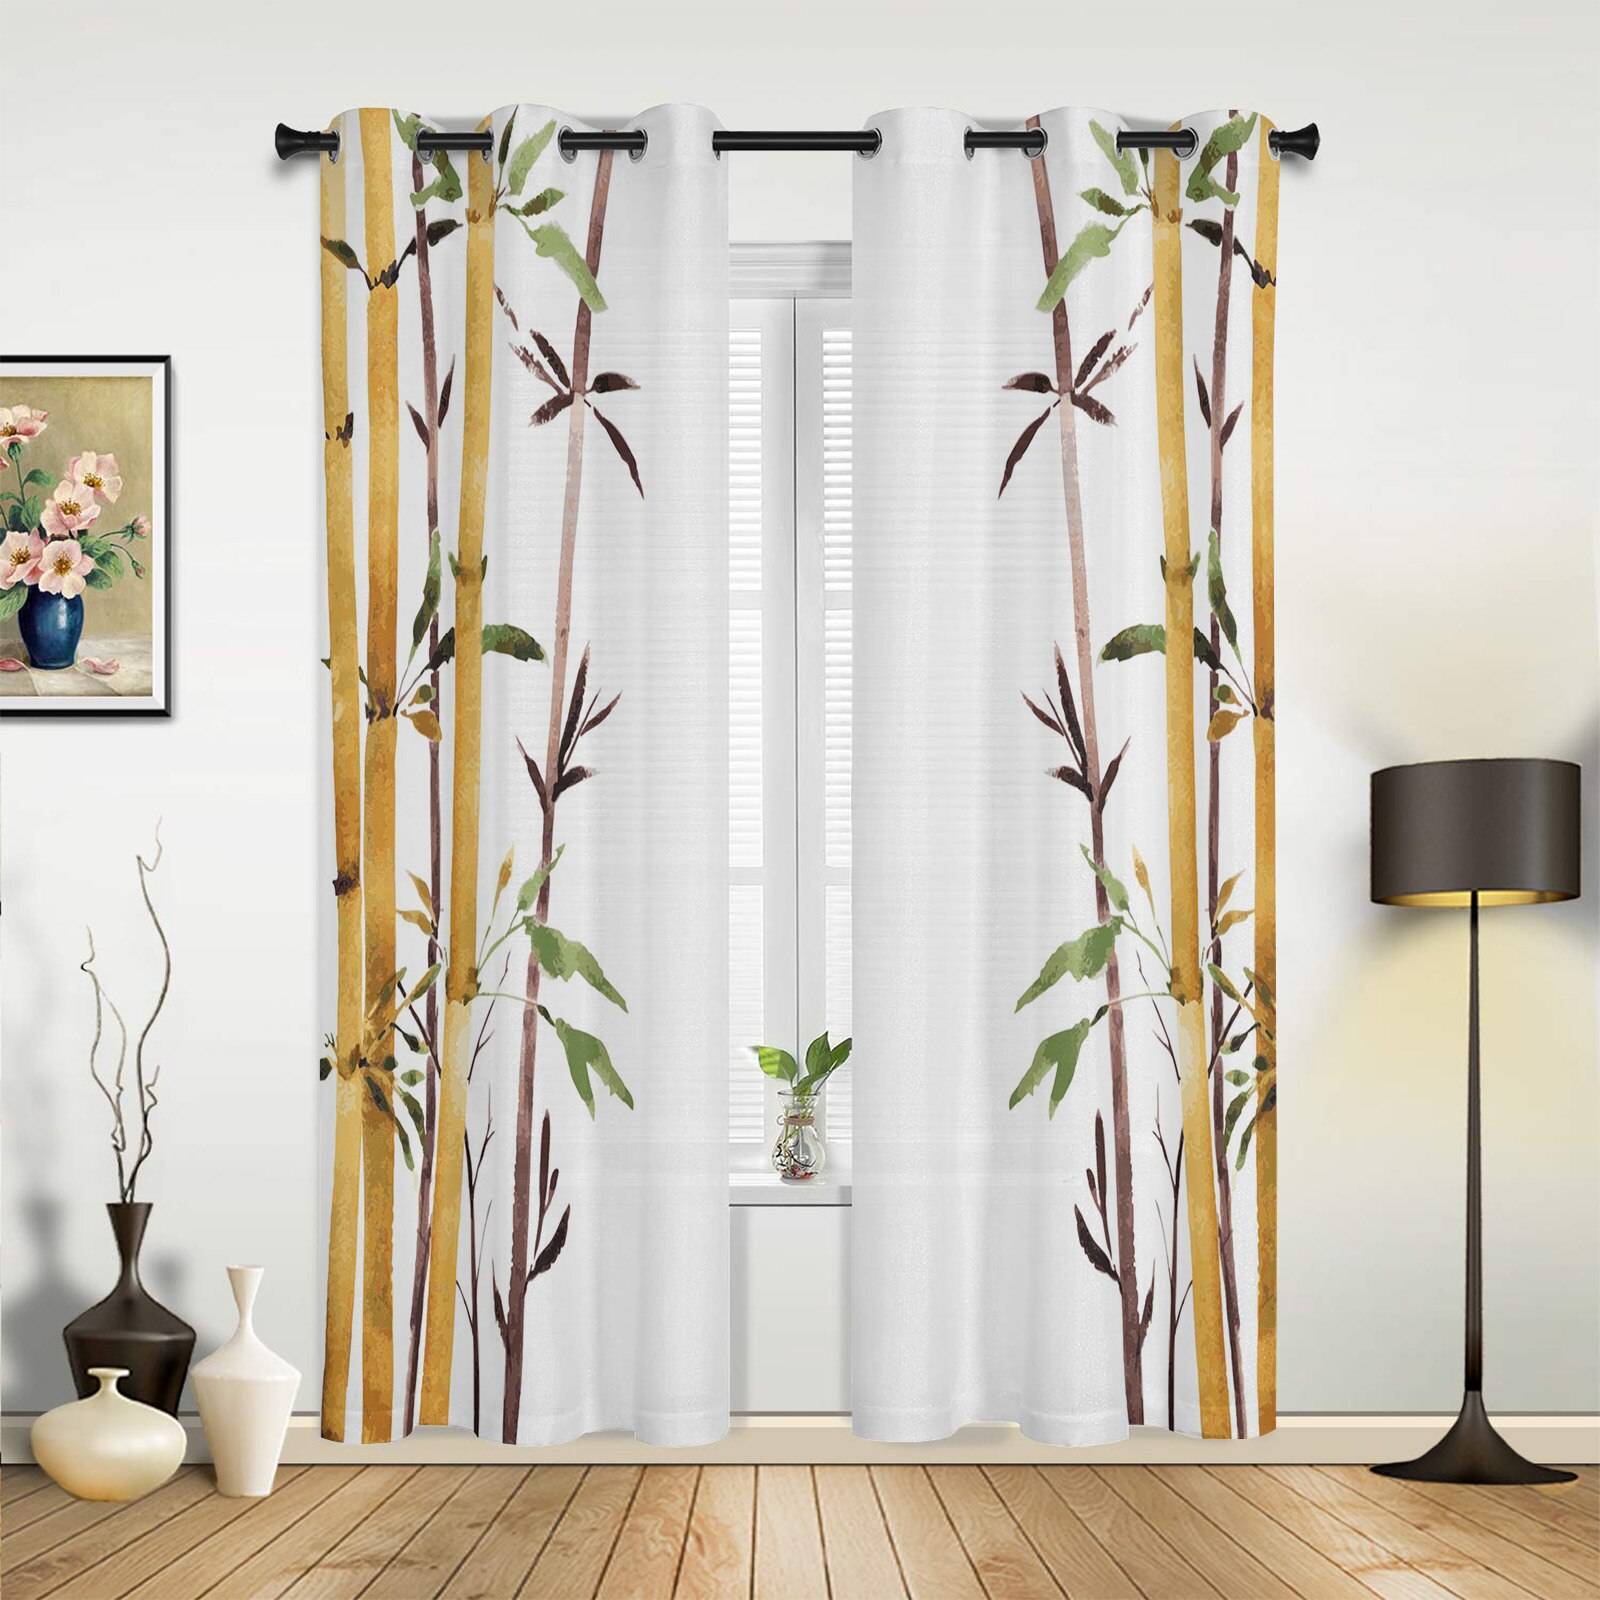 Bamboo Curtains Tall Bamboo Stems and Leaves Oriental Nature Wood ...